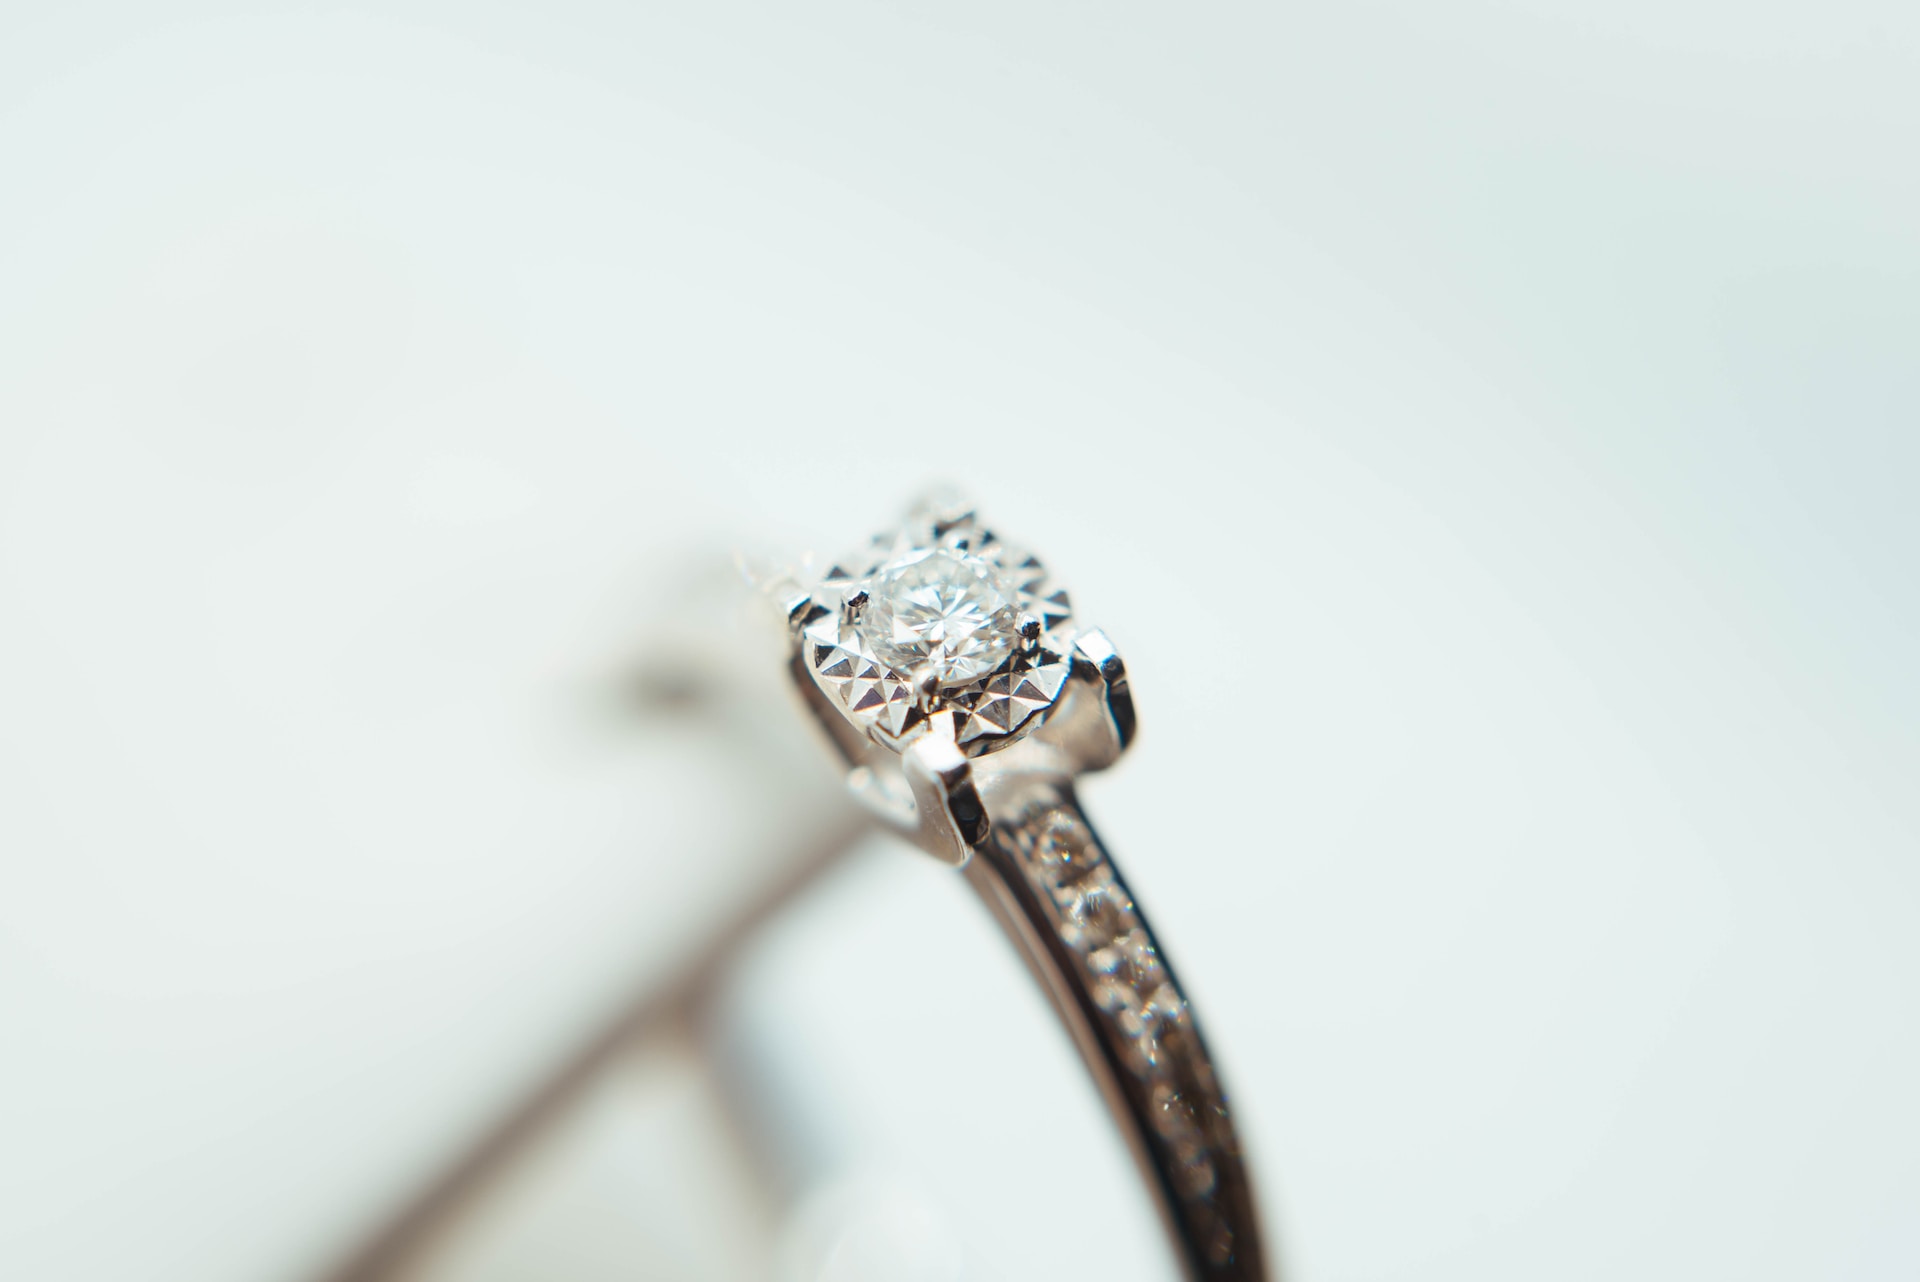 a close up of a diamond engagement ring